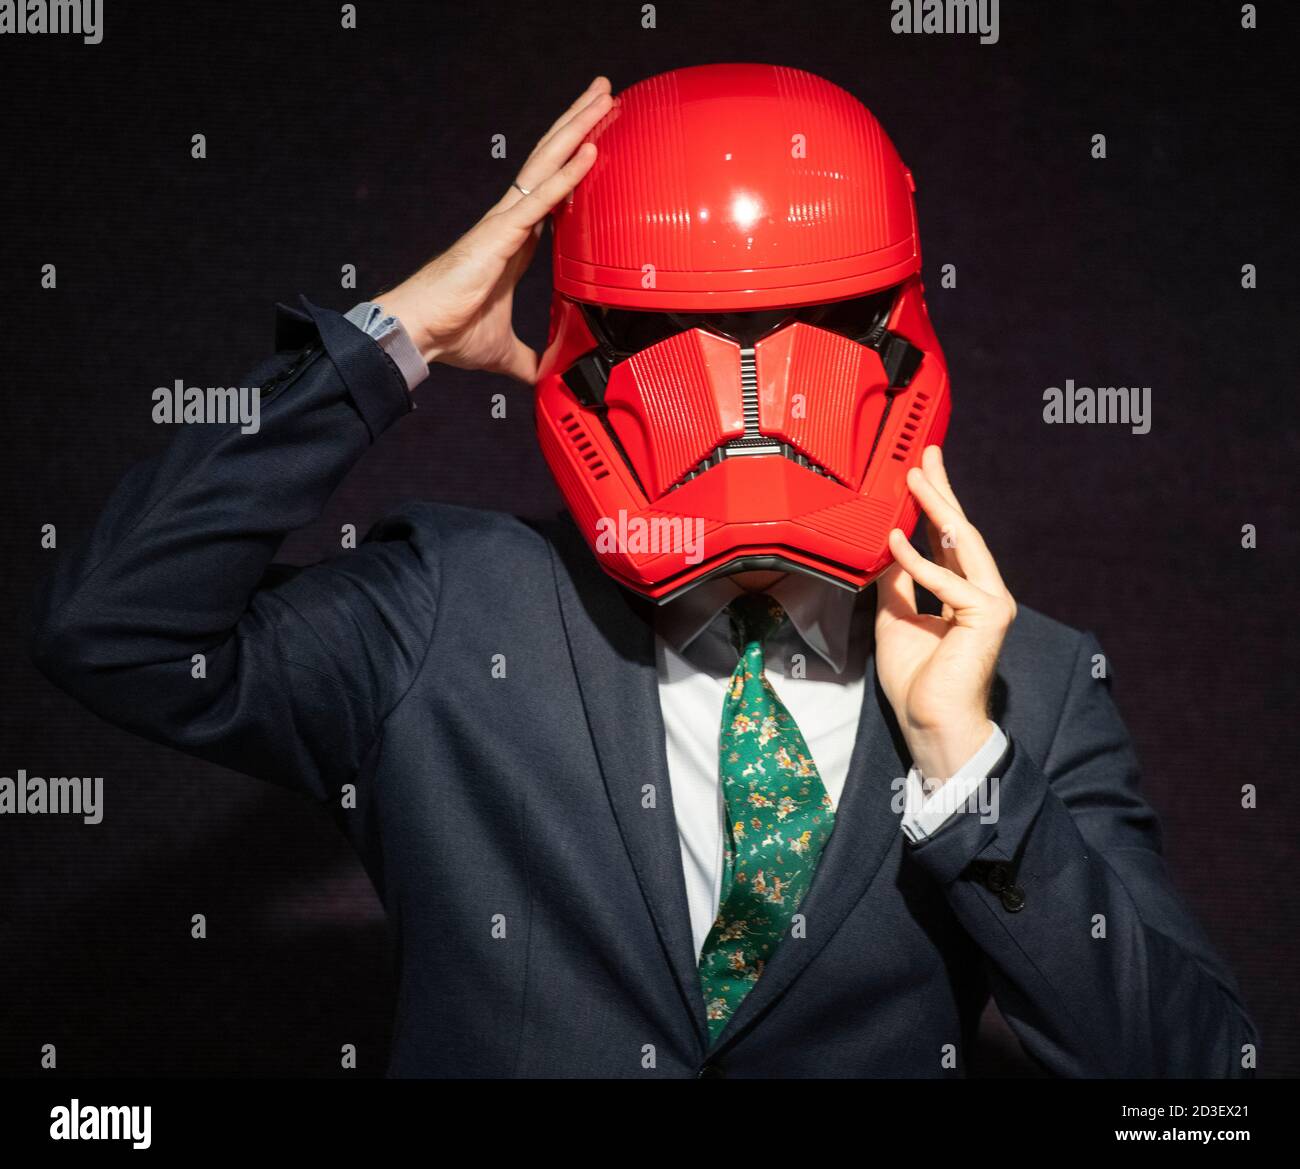 Bonhams, Knightsbridge, London, UK. 8 October 2020. Bonhams’ Entertainment Memorabilia sale includes a rare, screen-used Sith Trooper Helmet from Star Wars: The Rise Of Skywalker (2019), kindly donated to BAFTA’s year-round charitable activity by Lucasfilm. The helmet was created by BAFTA award-winning costume designer Michael Kaplan in a striking red colour, distinguishing the new stormtroopers from the classic, white-armoured forces beloved by previous generations. It has an estimate of £20,000-30,000. Credit: Malcolm Park/Alamy Live News. Stock Photo